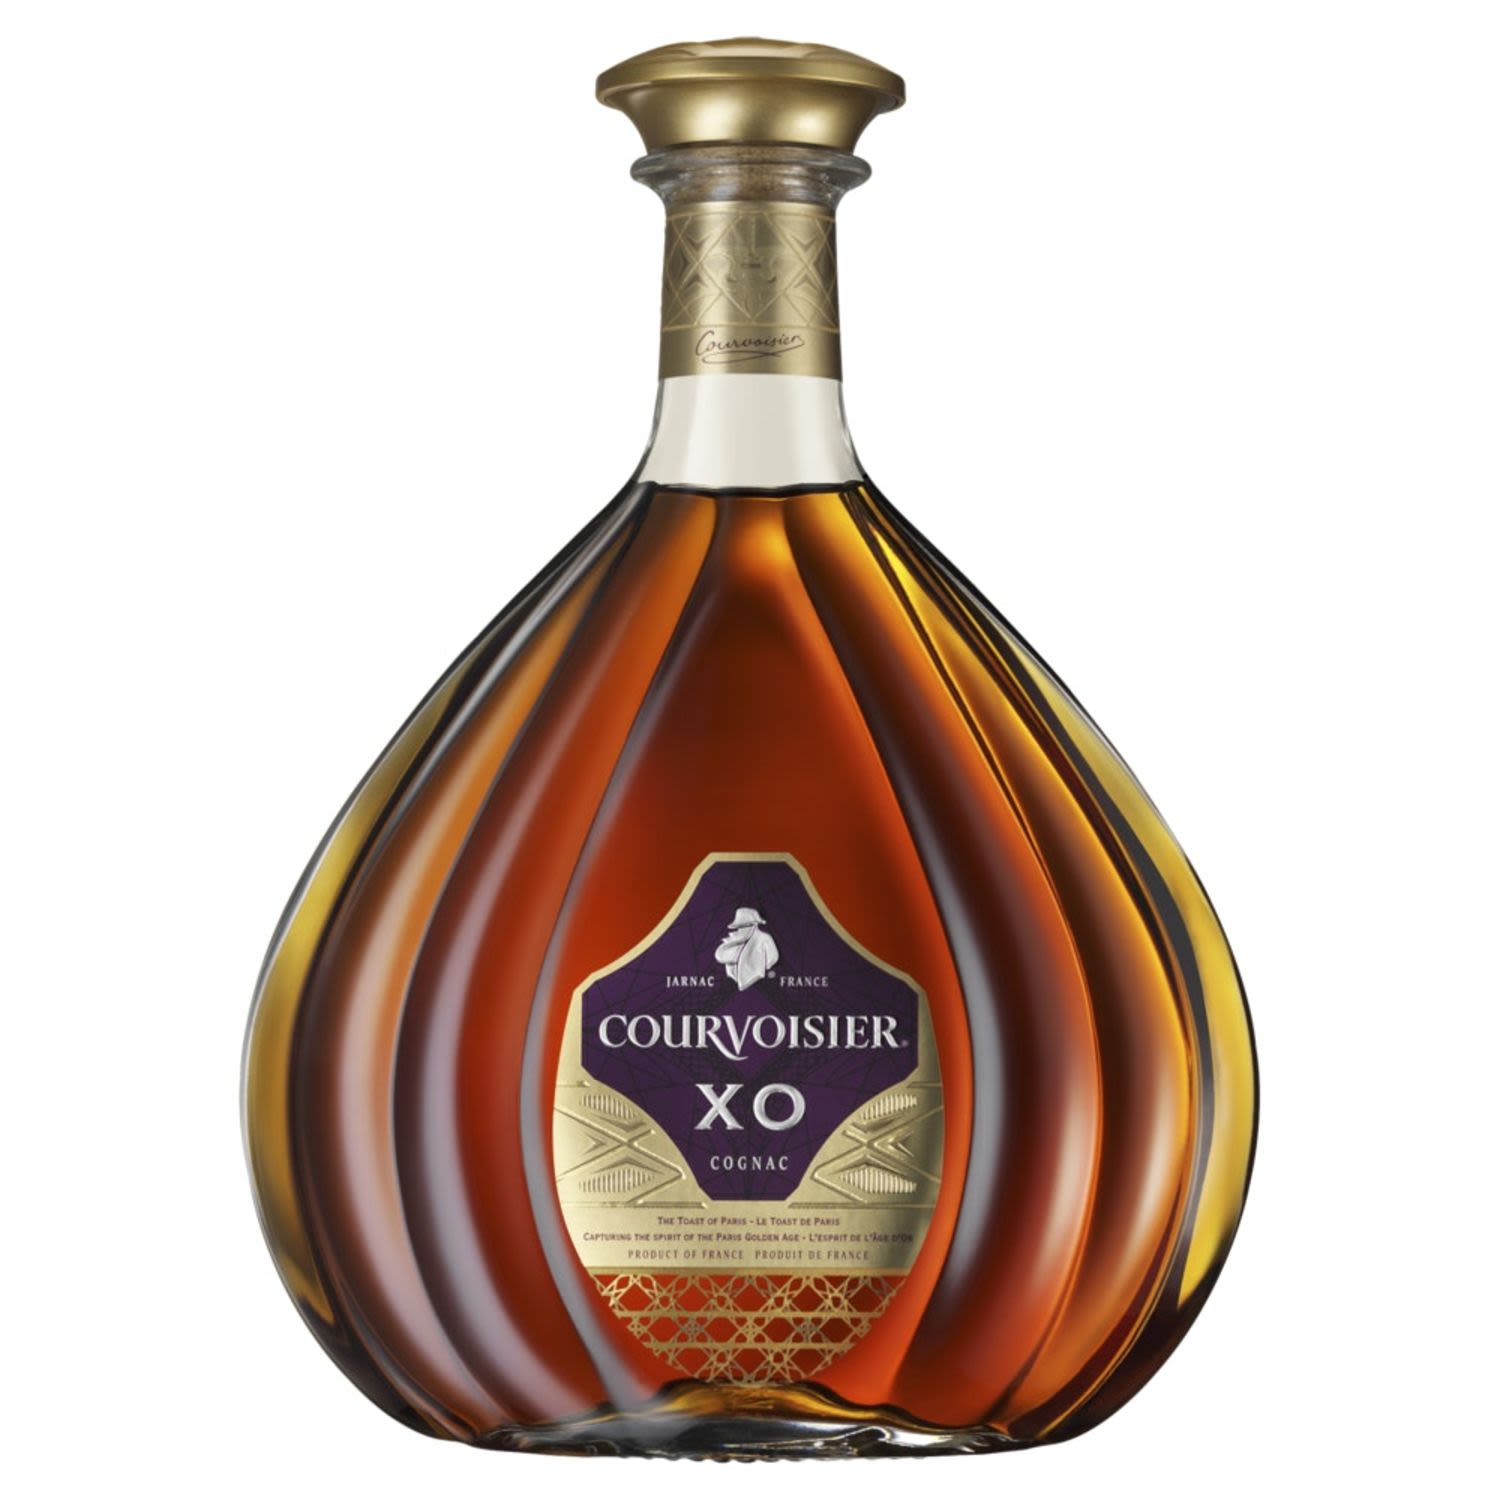 Superb XO Cognac that displays fruit, nutmeg and spice on the nose and a palate with will take you from floral sweetness to savoury oak.<br /> <br />Alcohol Volume: 40.00%<br /><br />Pack Format: Bottle<br /><br />Standard Drinks: 22.1</br /><br />Pack Type: Bottle<br /><br />Country of Origin: France<br />